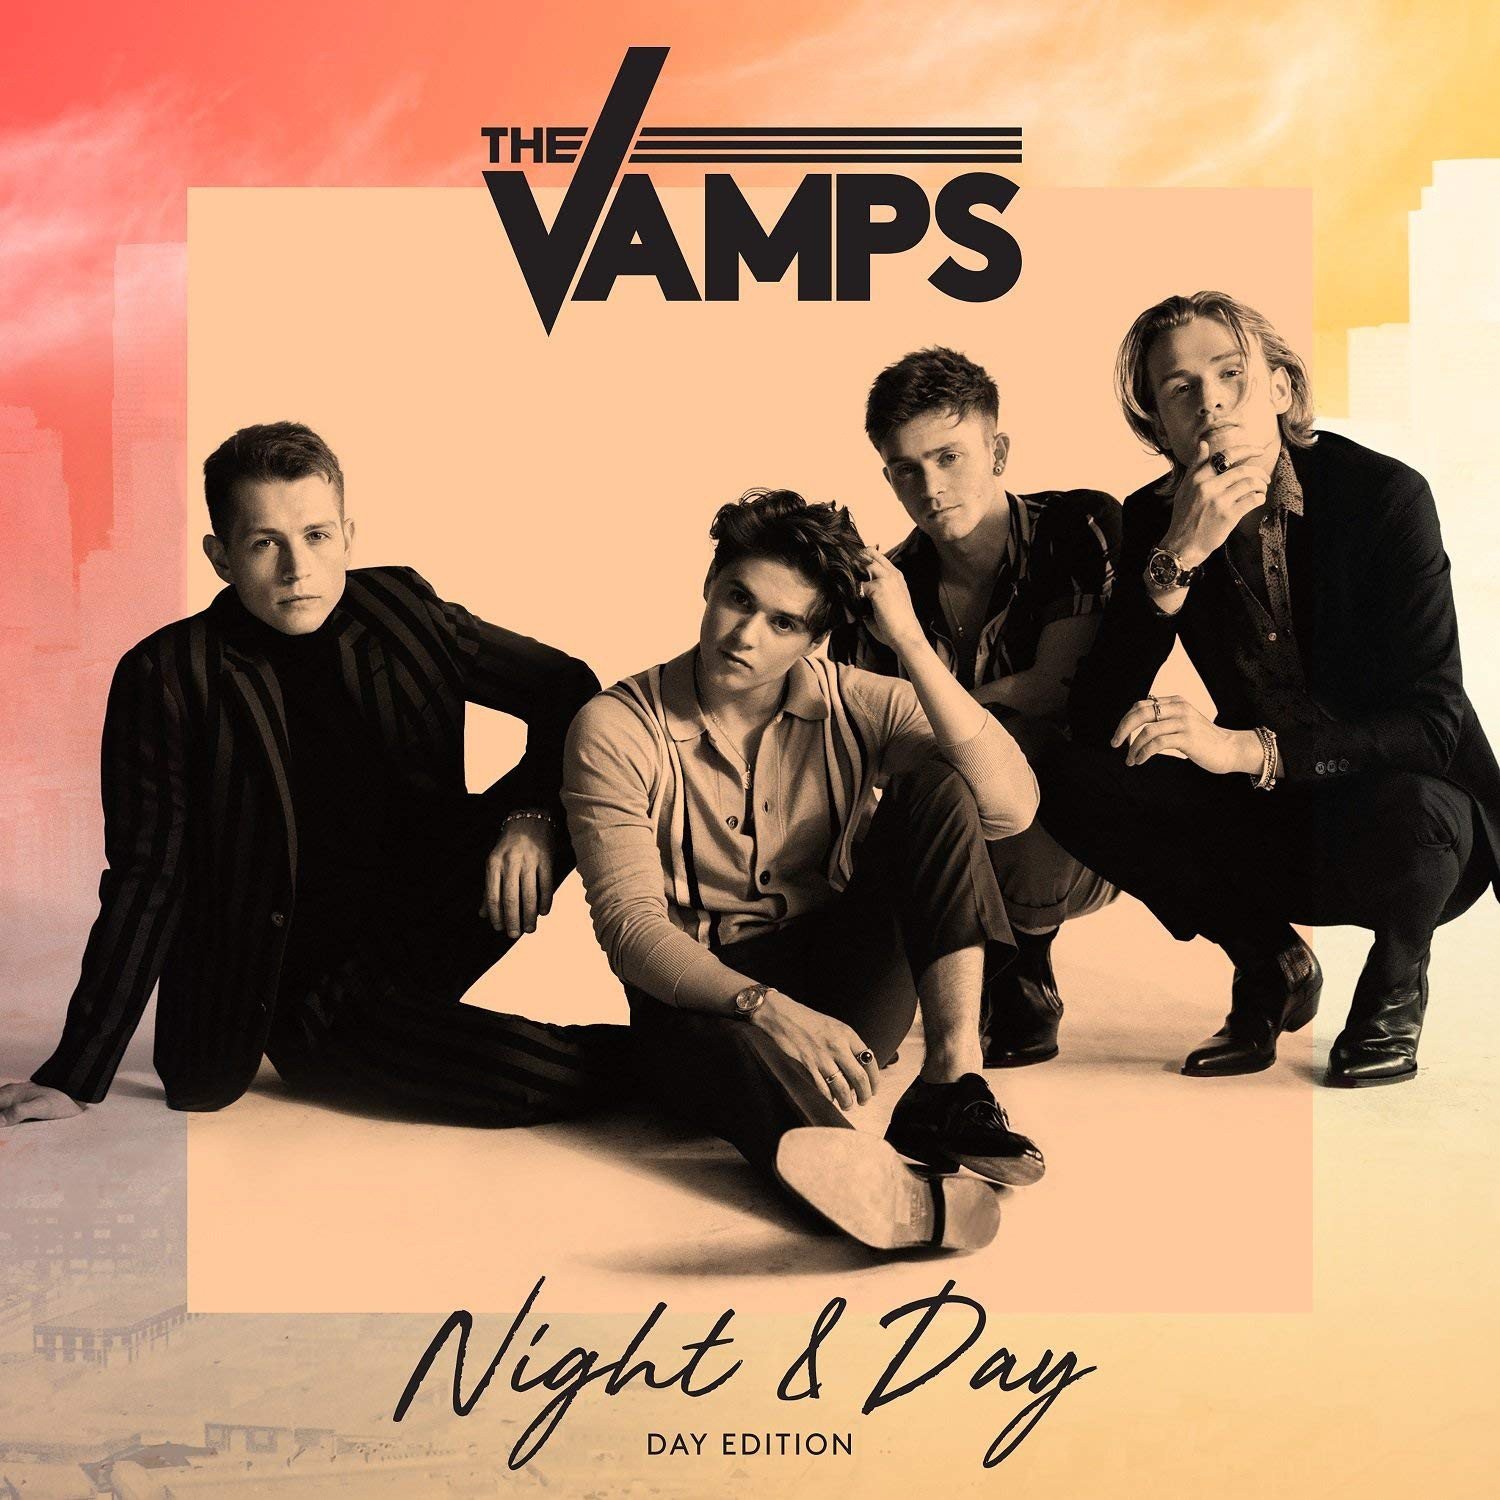 Night And Day Day Edition Is The Vamps Cringeworthy Follow Up Album Review Yp South China Morning Post